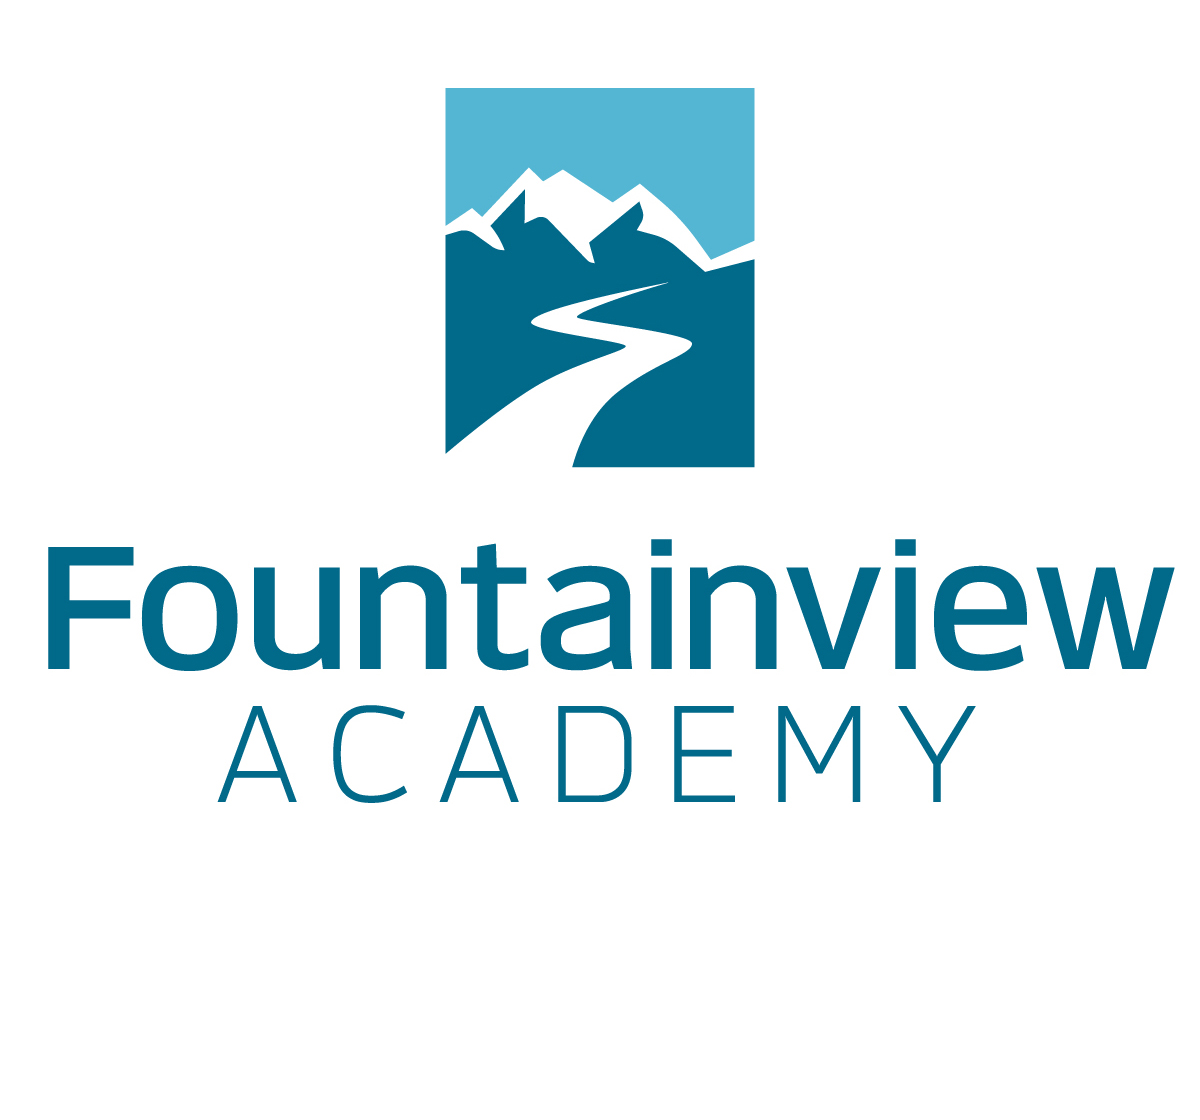 Our New Brand Identity Fountainview Academy